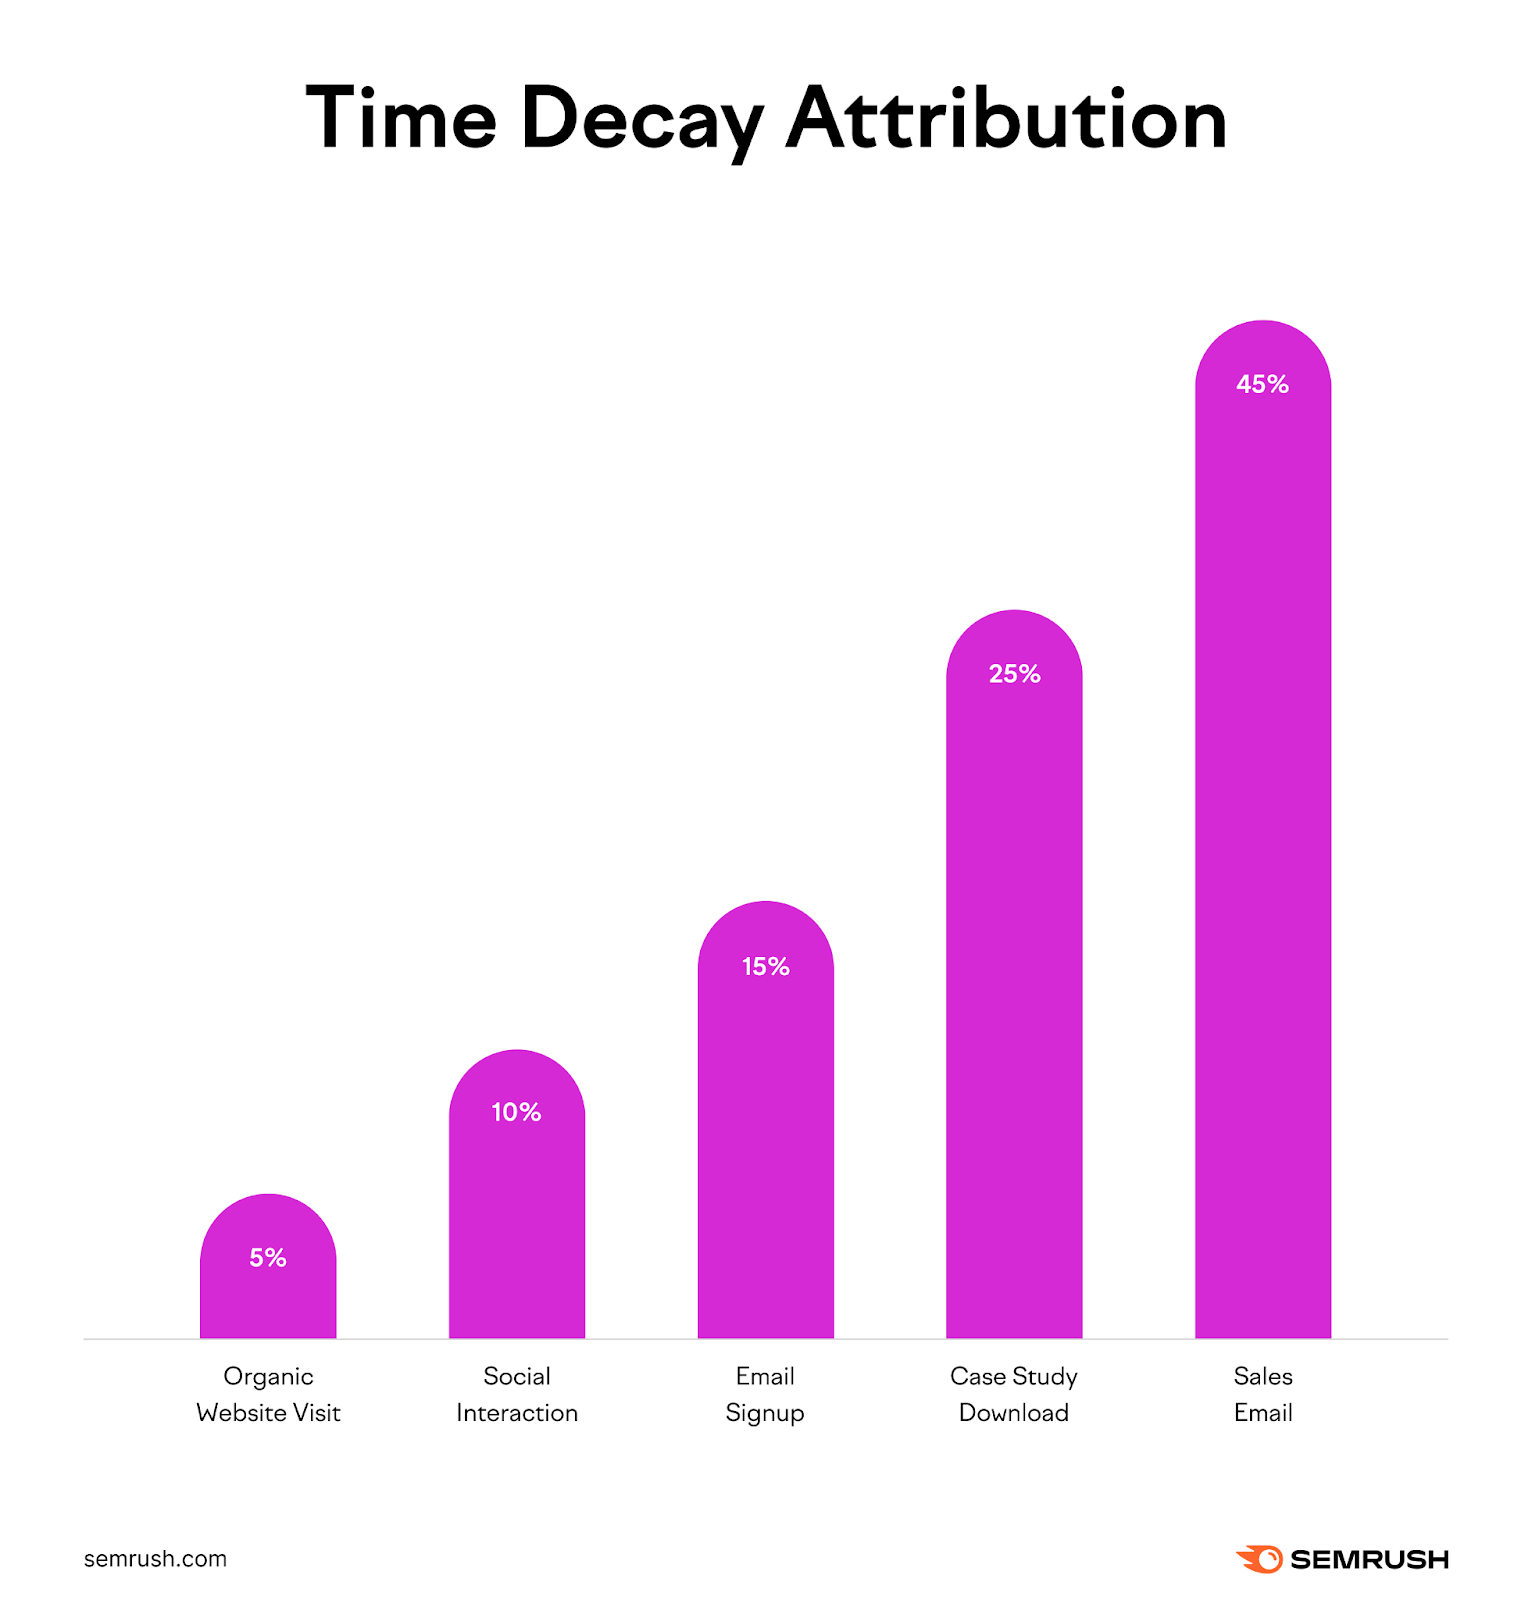 Time decay attribution assigns an expanding  magnitude  of recognition  to touchpoints from archetypal  to last.